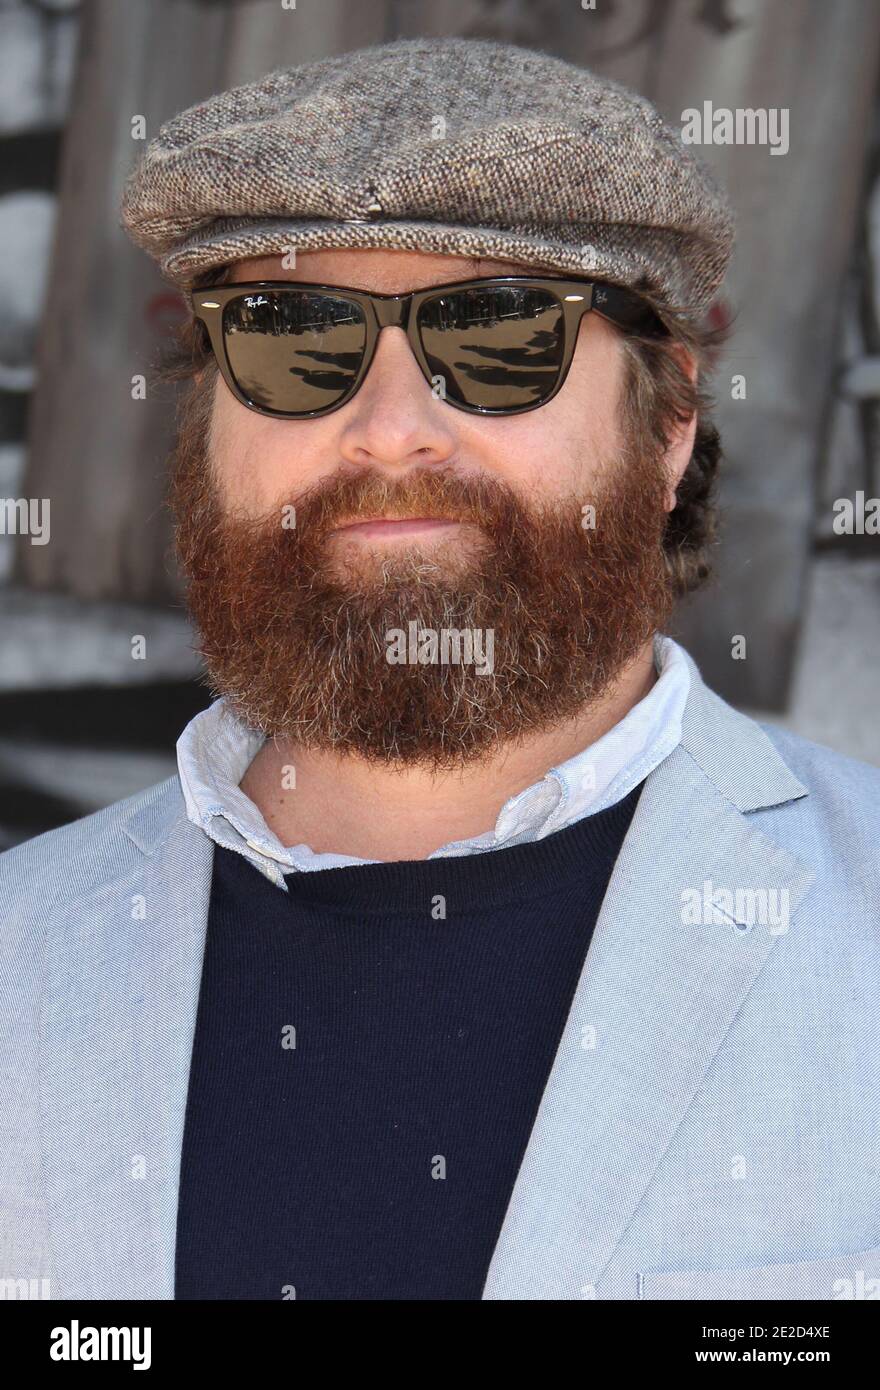 Zach Galifianakis at the LA premiere for animated movie 'Puss In Boots' at the Regency Village Theatre in Westwood, Los Angeles, CA, USA on October 23, 2011. Photo by Baxter/ABACAPRESS.COM Stock Photo